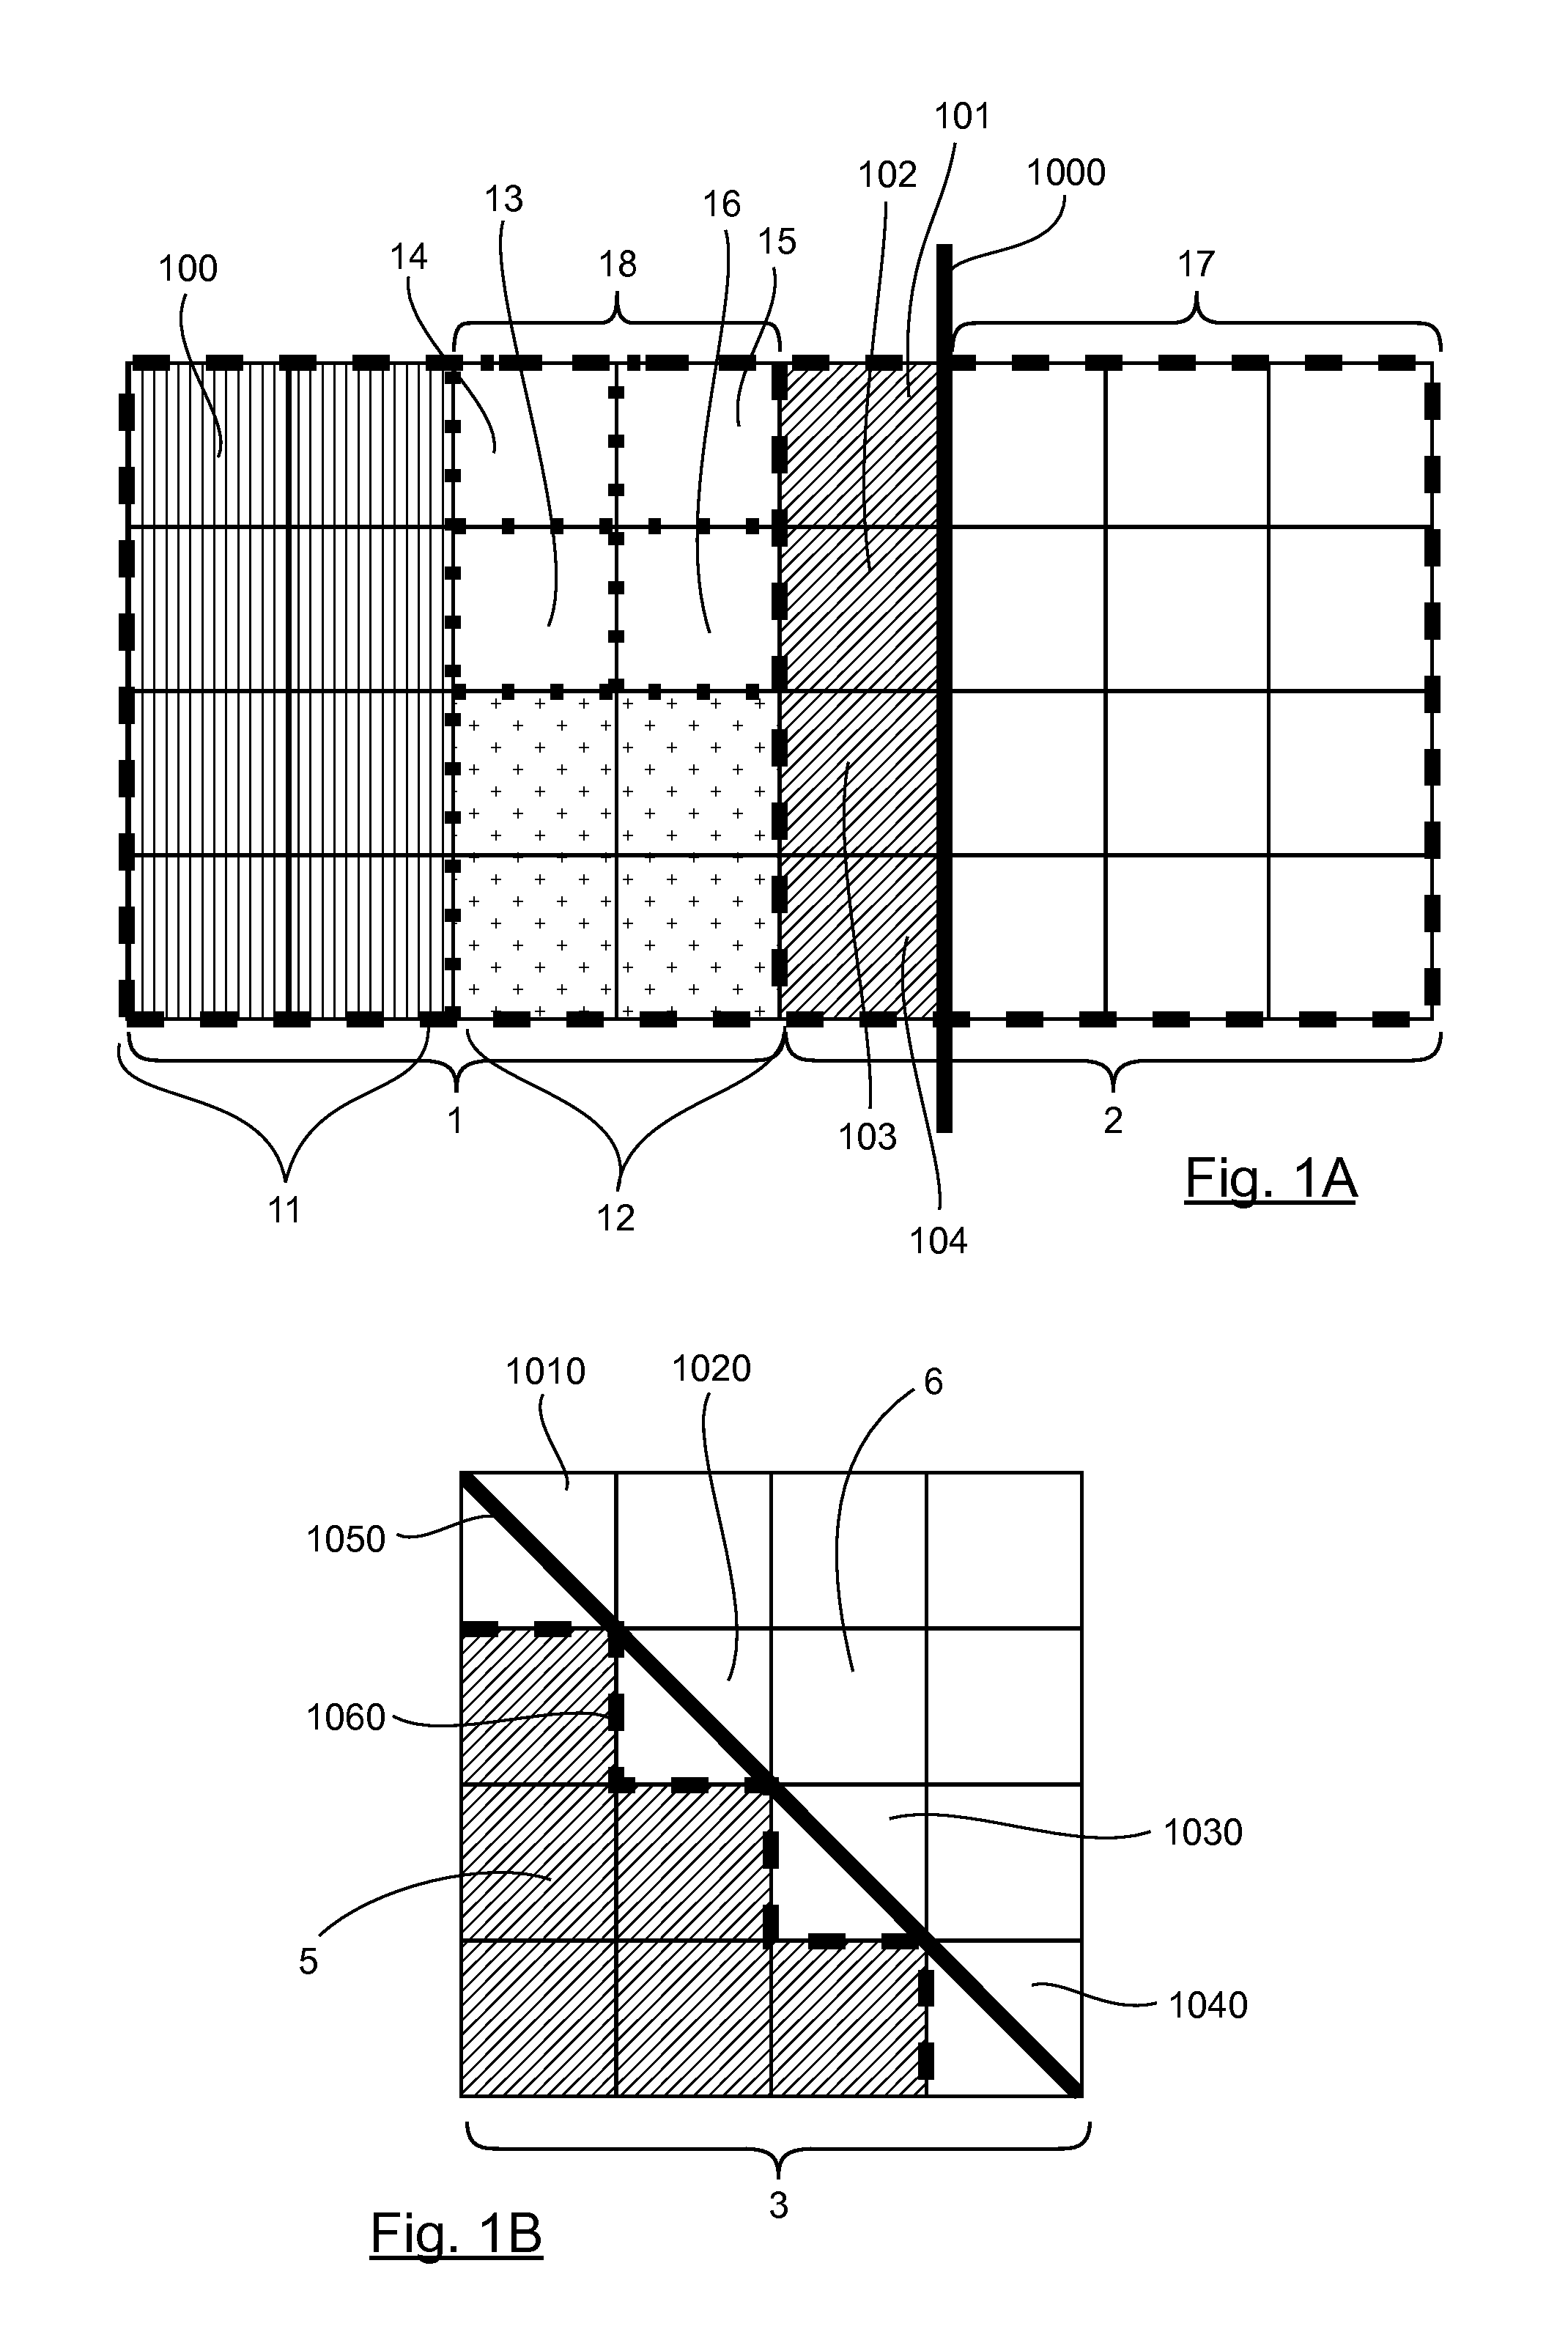 Method for encoding and decoding images, encoding and decoding devices, corresponding data streams and computer program